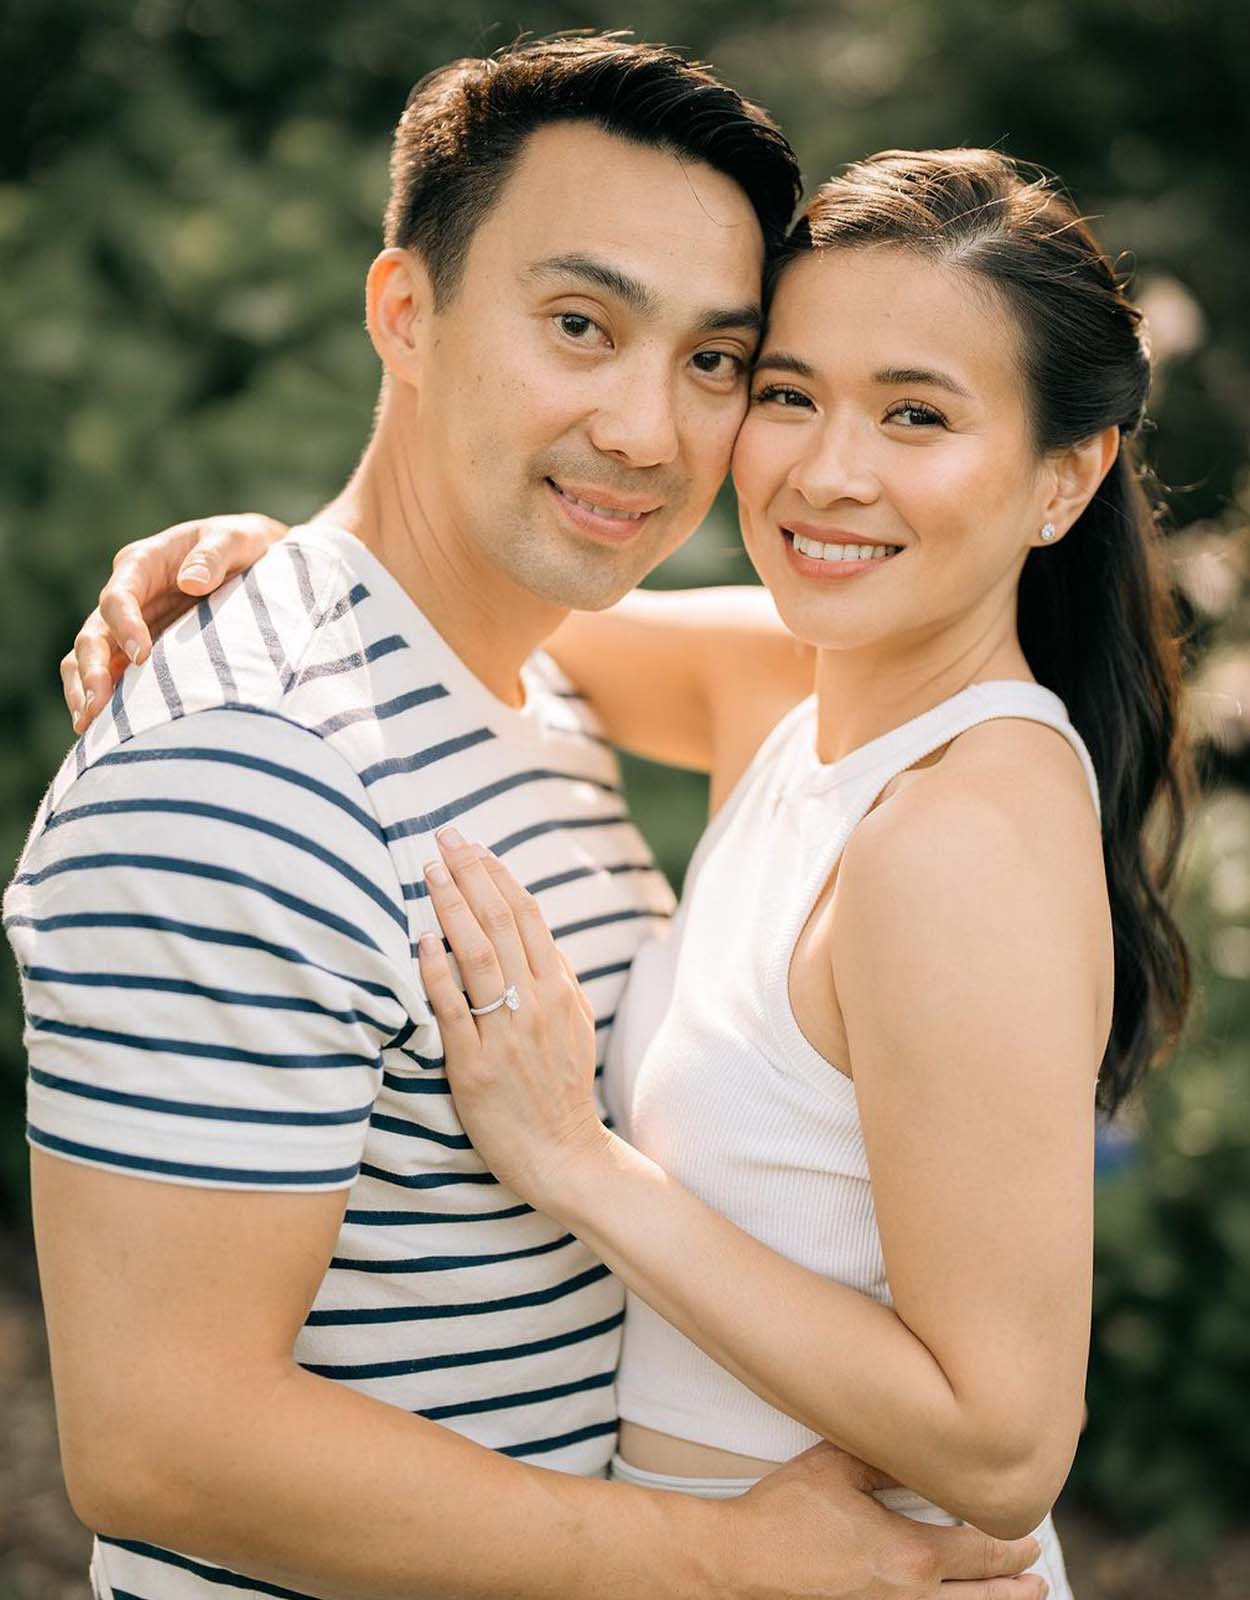 LJ Reyes was one of the celebrities who found love again after a painful break-up.